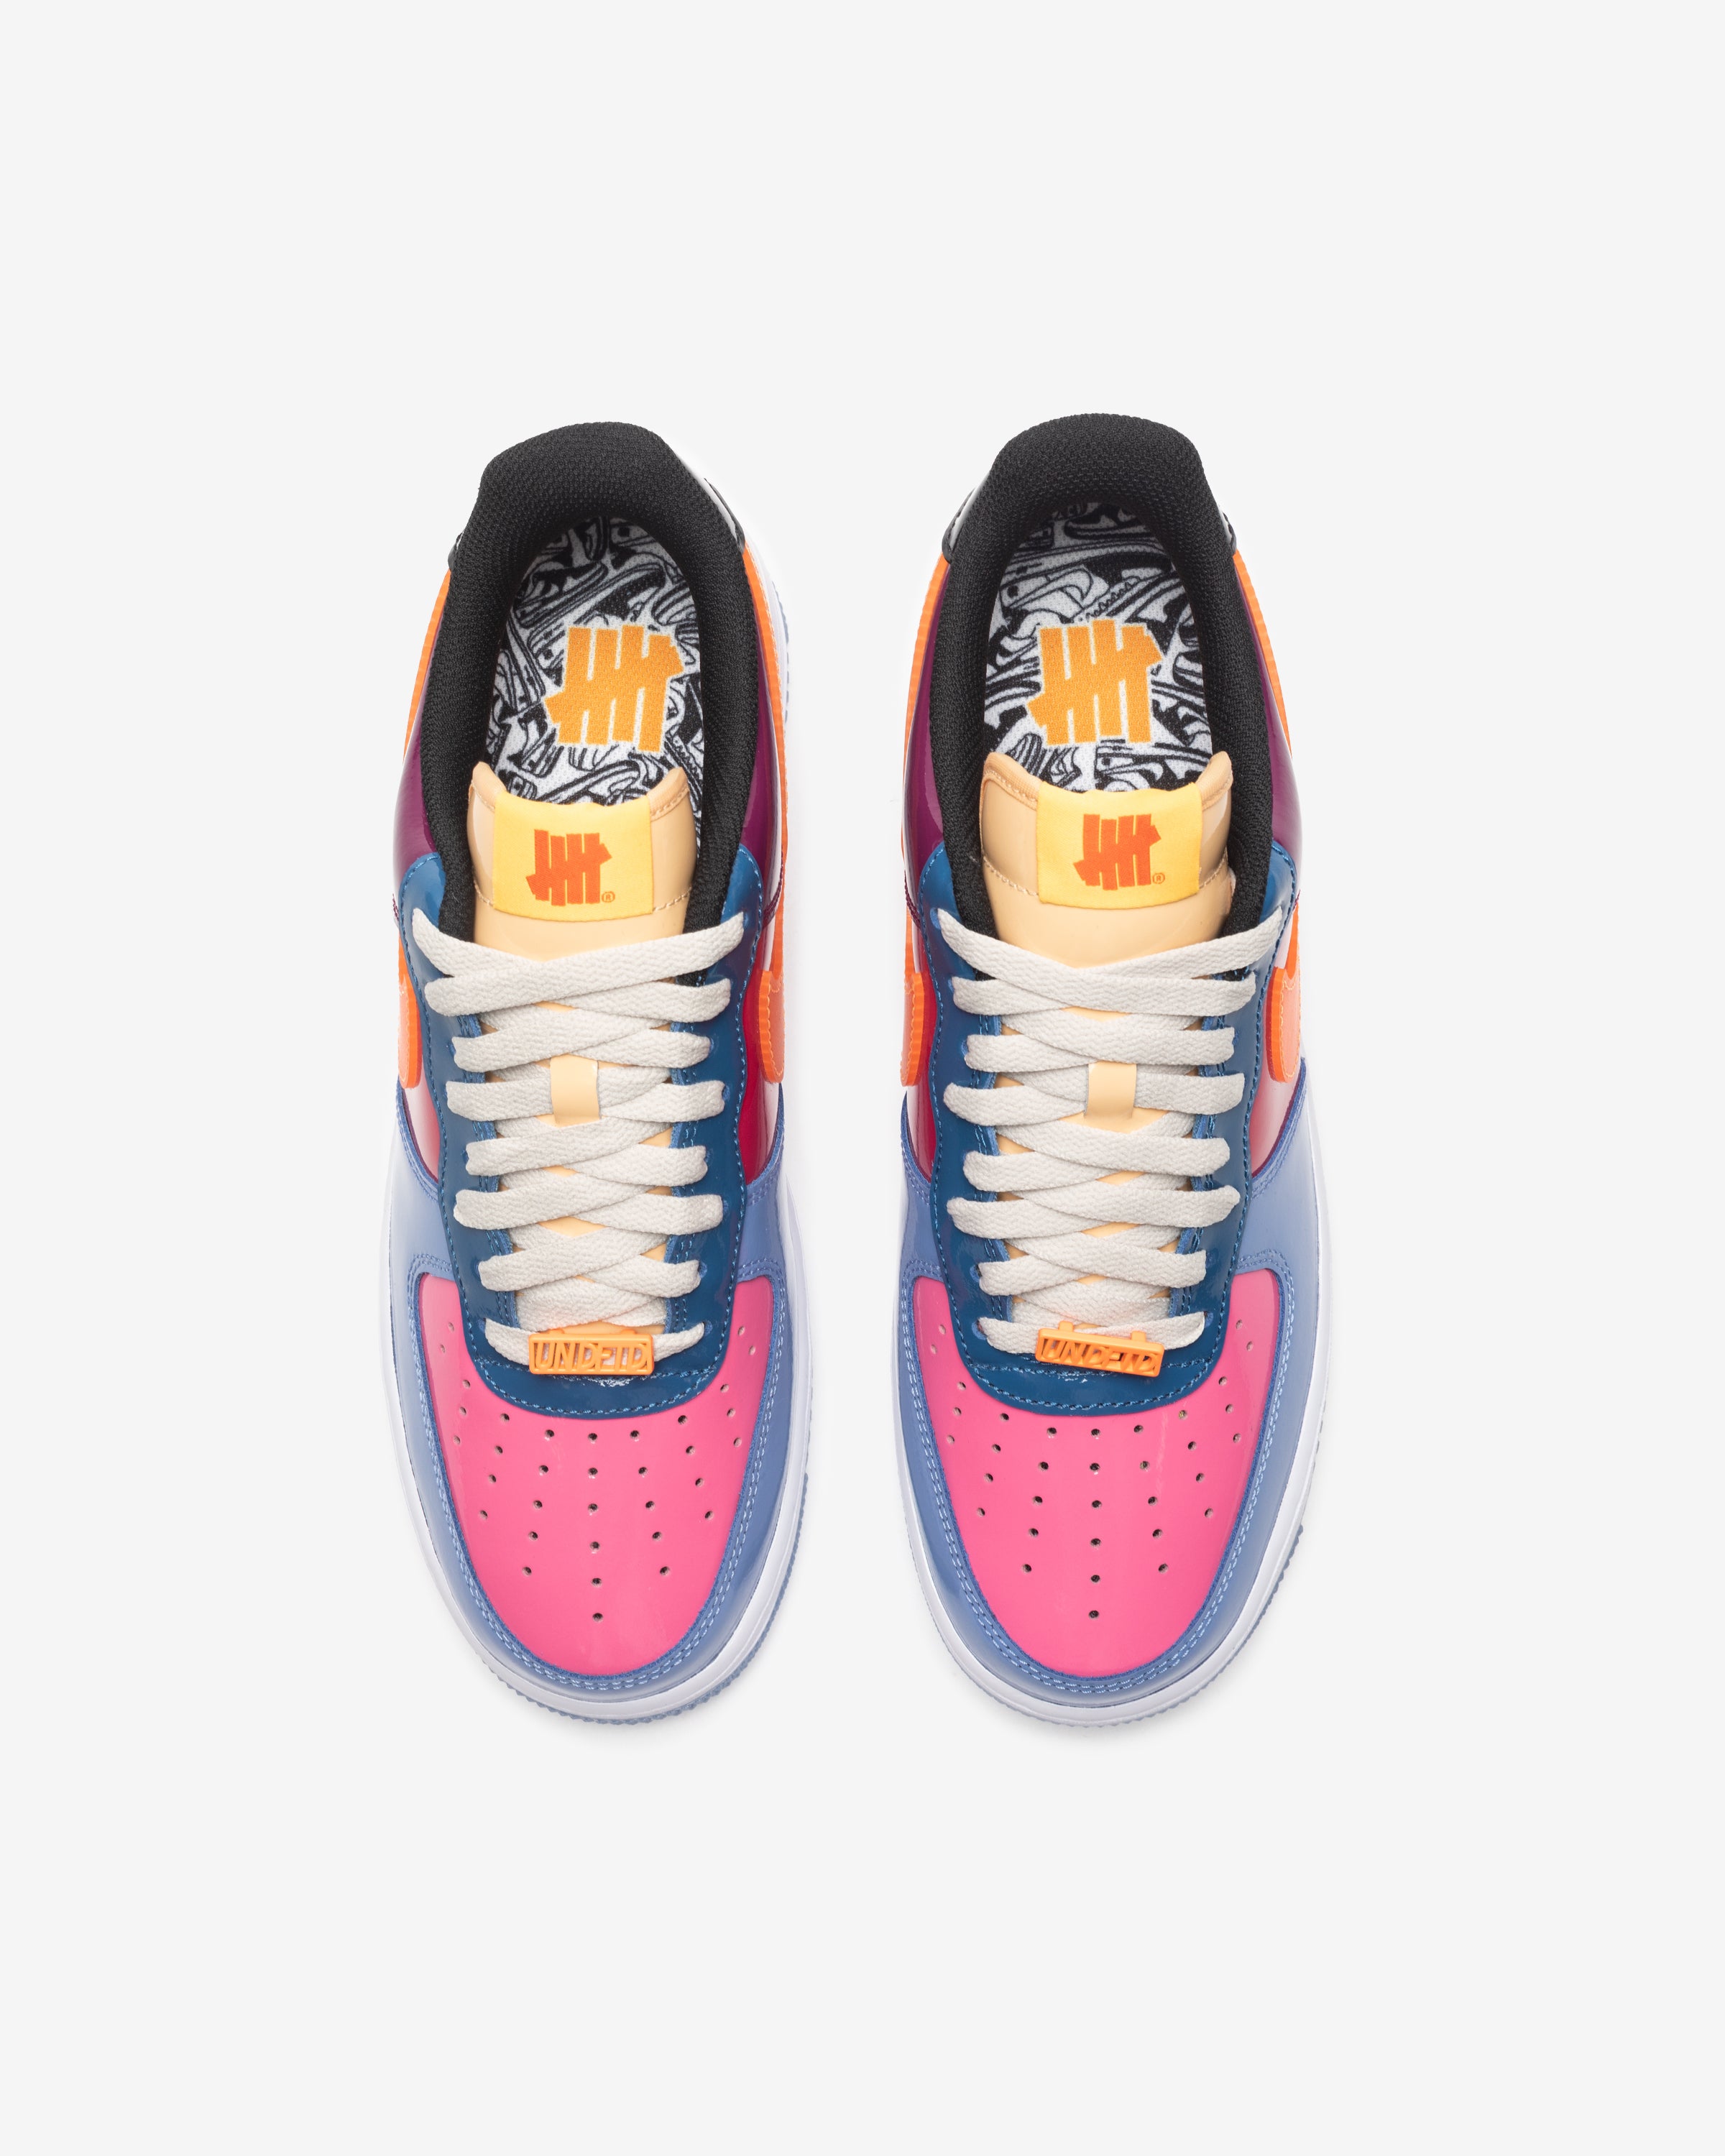 Undefeated x Nike Air Force 1 Low Multi-Color - Size 10 Men